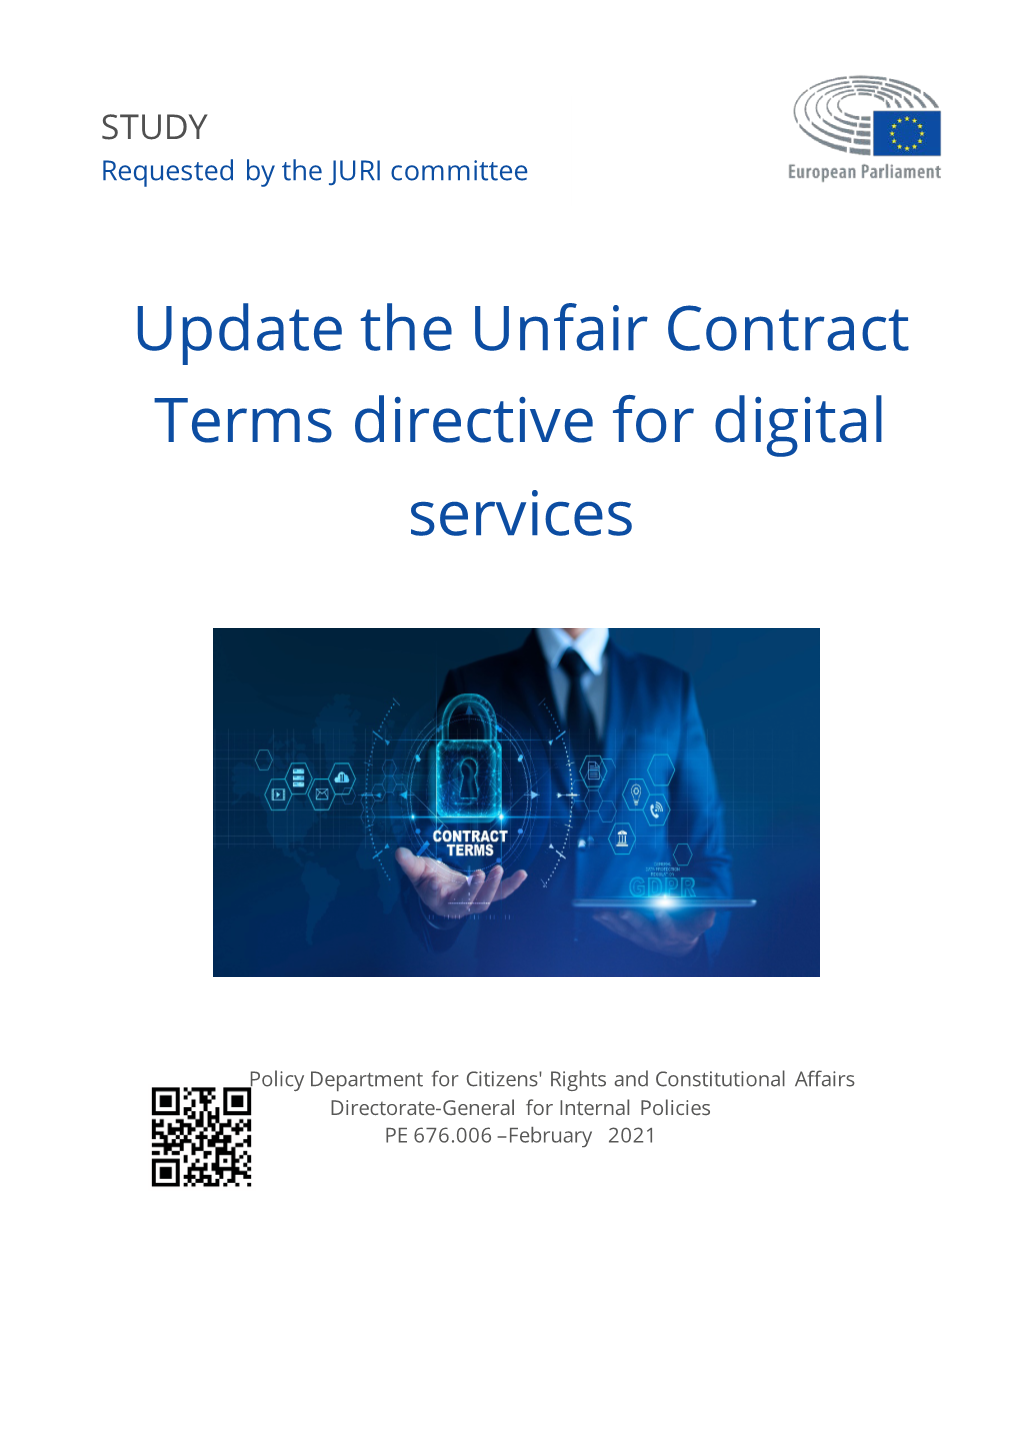 Update the Unfair Contract Terms Directive for Digital Services